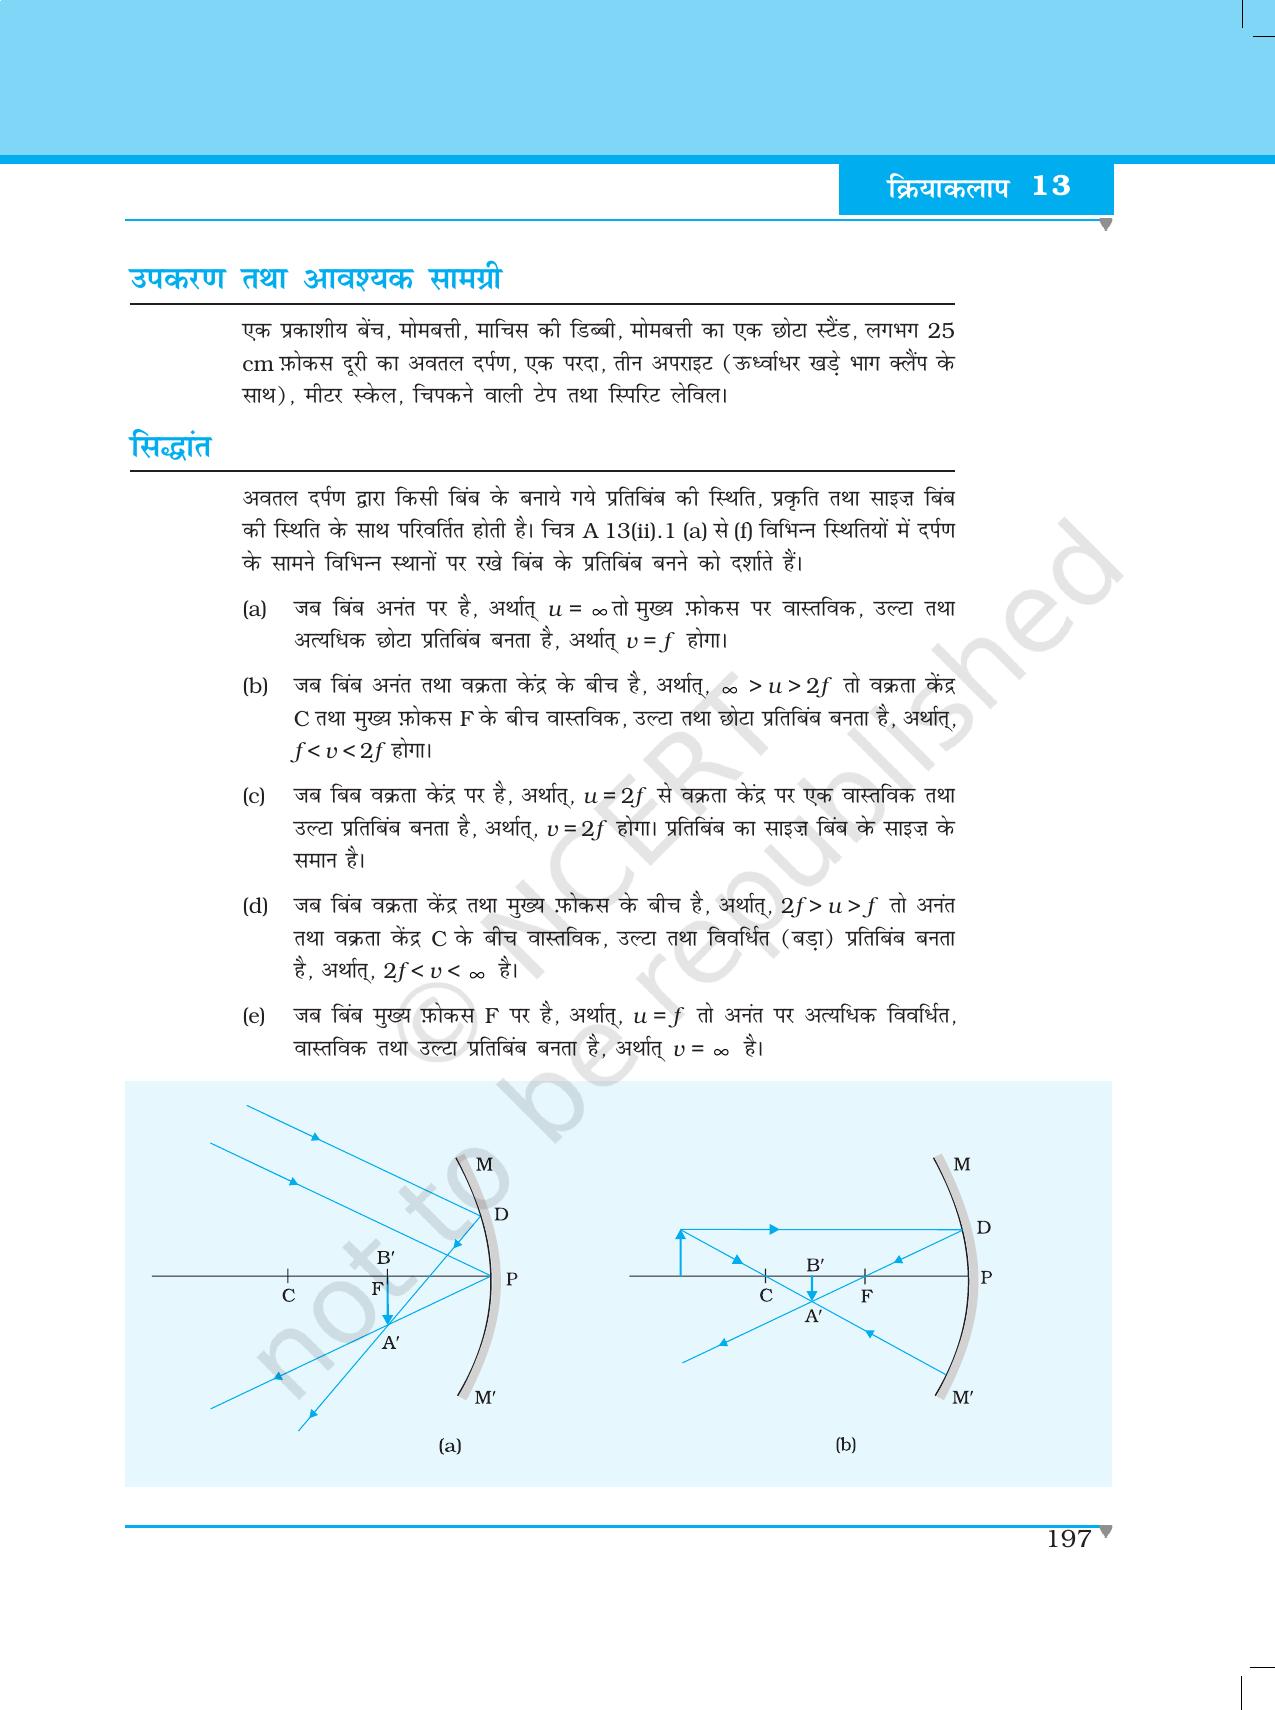 NCERT Laboratory Manuals for Class XII भौतिकी - क्रियाकलाप (12 - 14) - Page 8